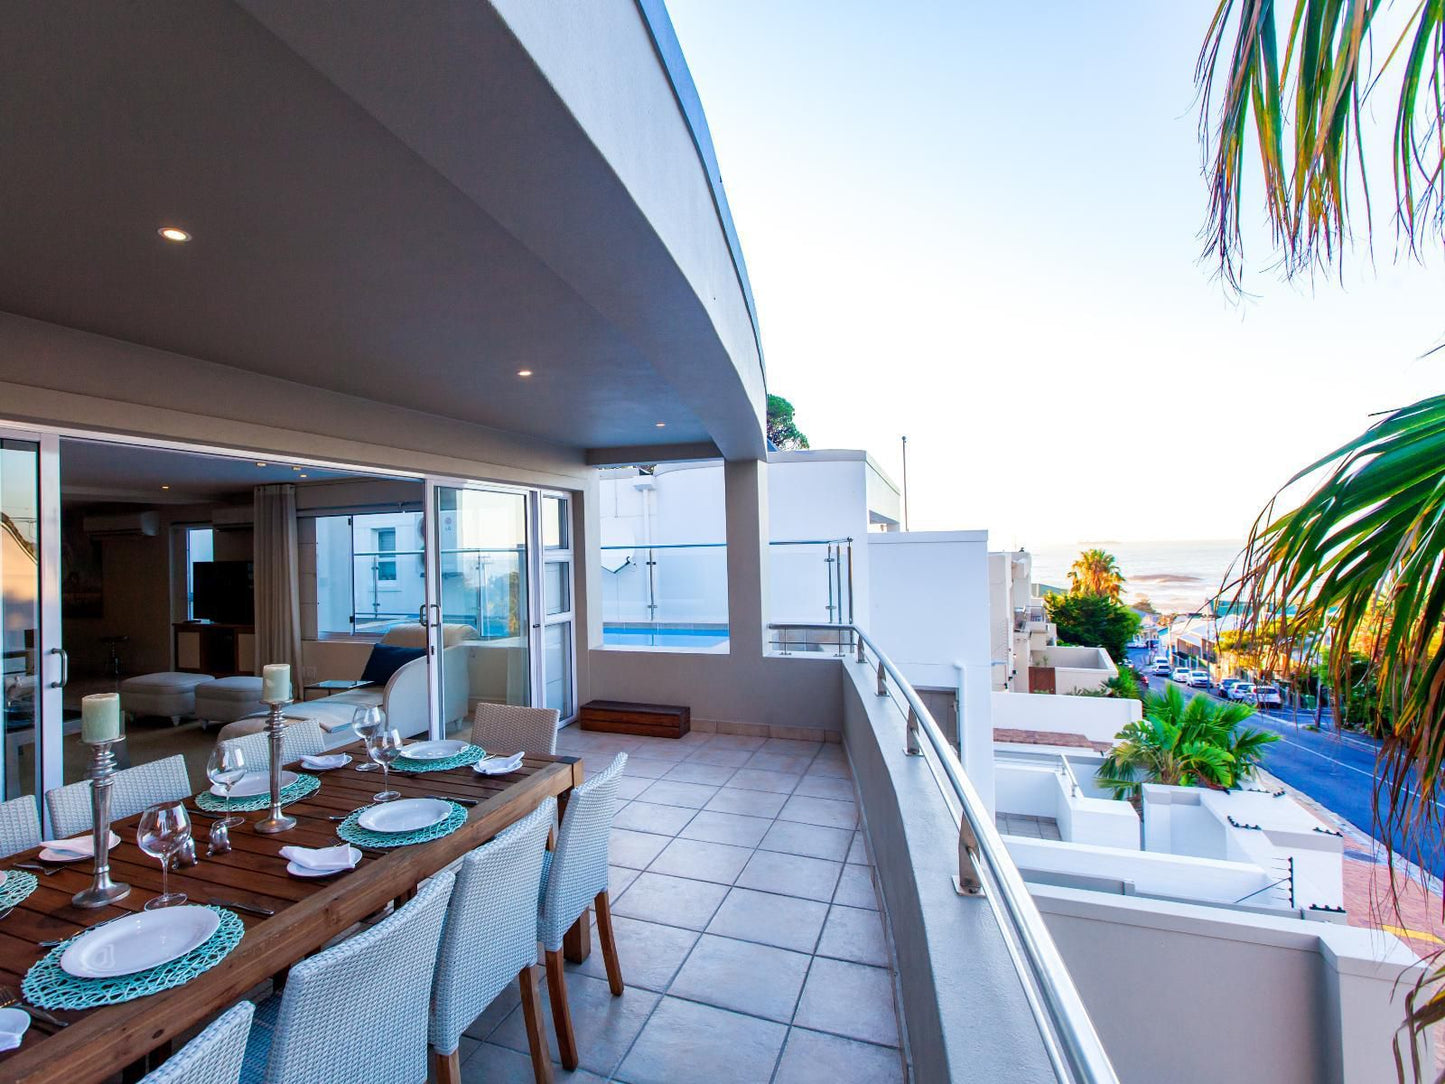 Villa On Slopes Of Geneva Drive Camps Bay Cape Town Western Cape South Africa 